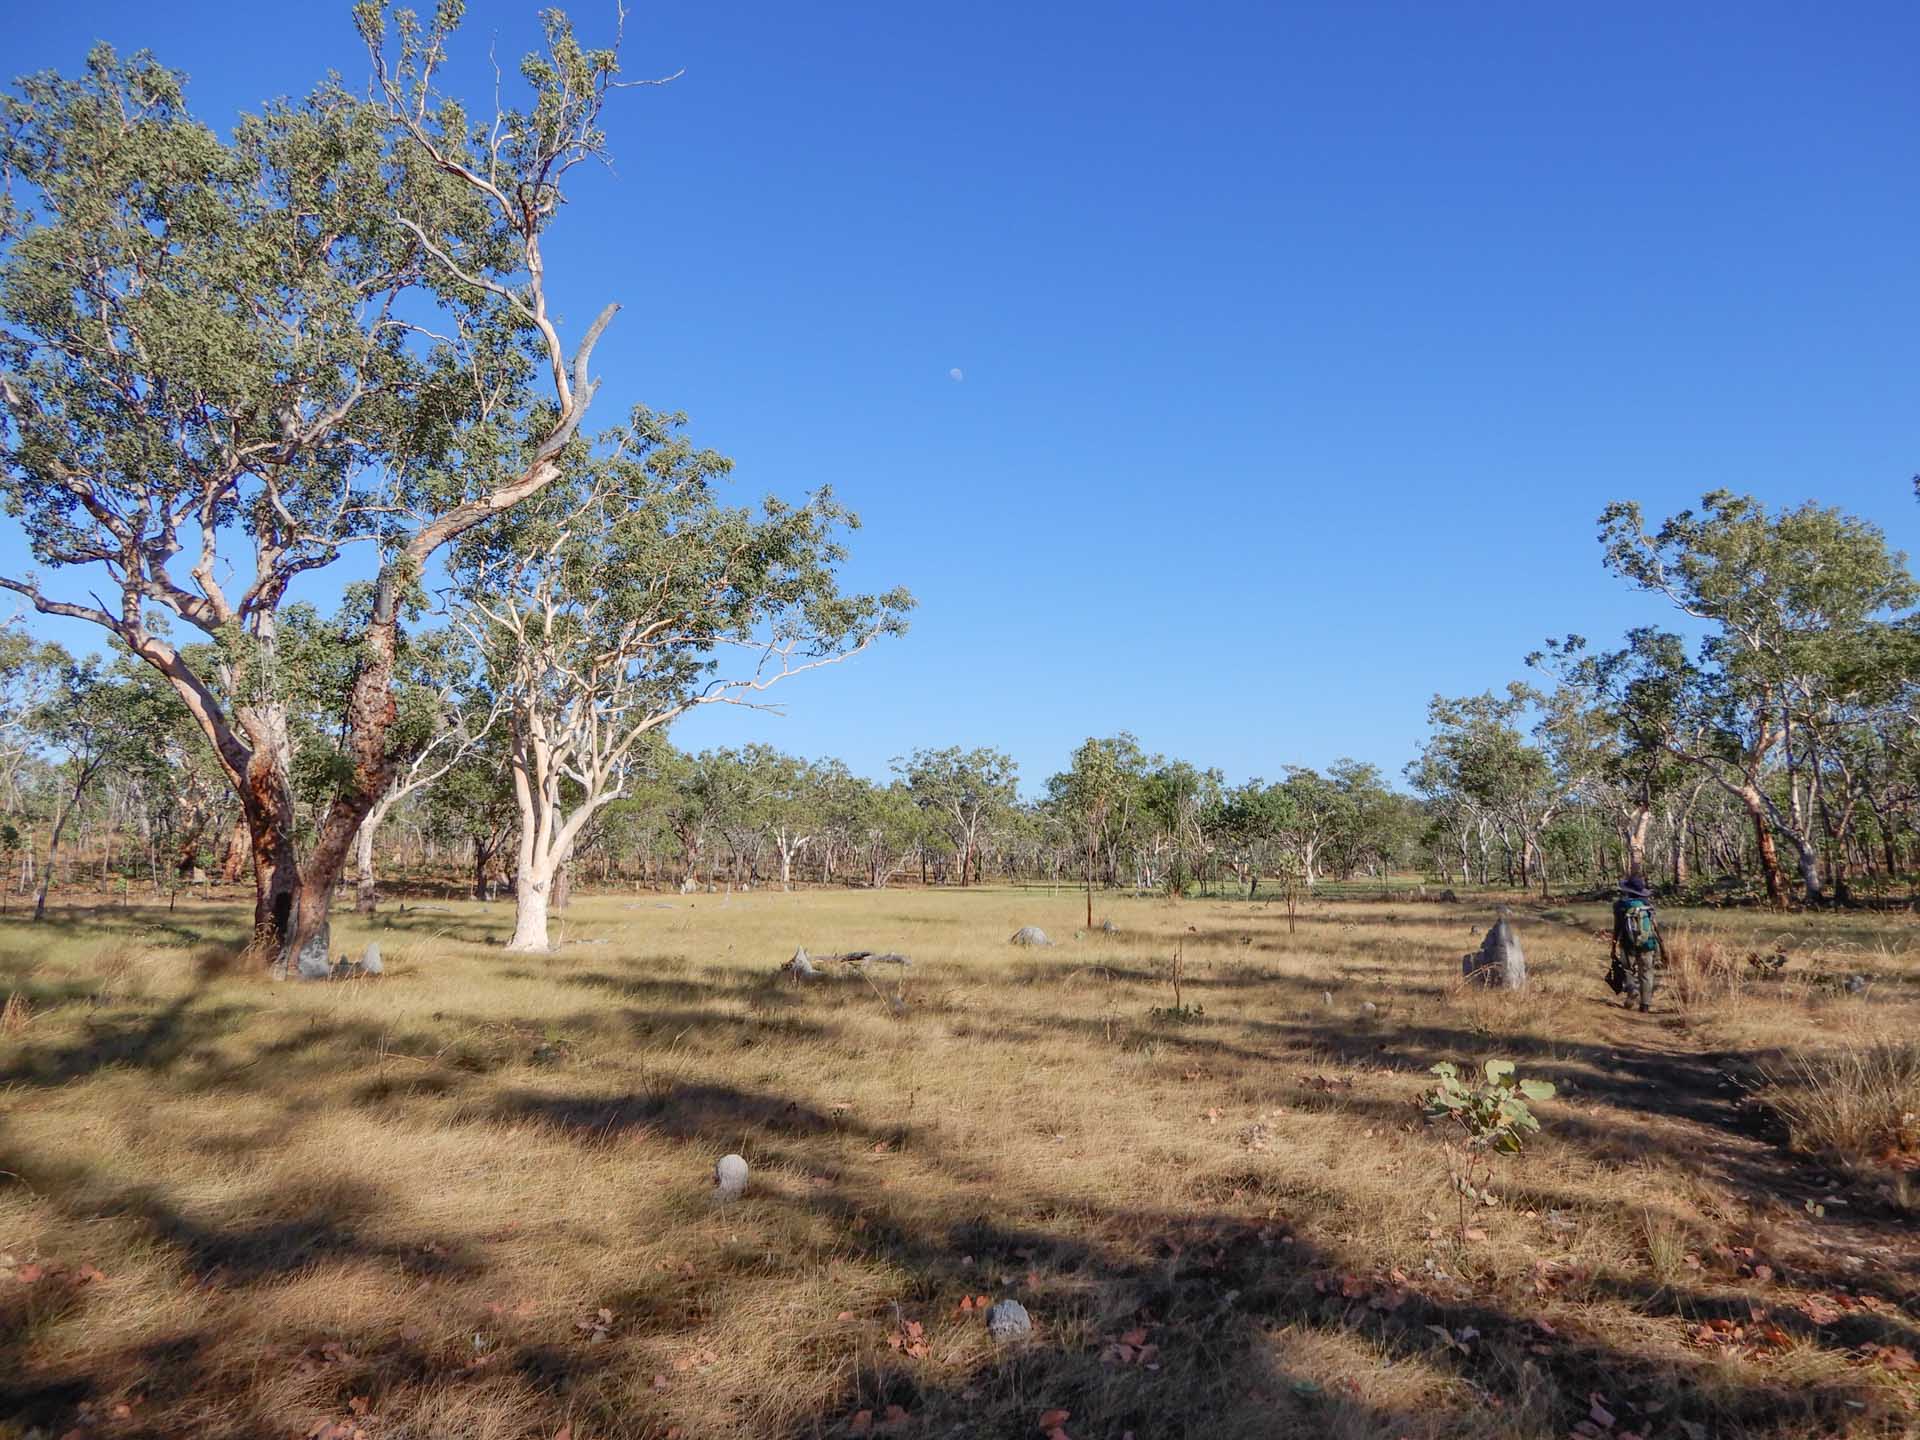 The ‘Big 3’ Hikes of the NT: How Do They Compare?, hiking, northern territory, jatbula trail, mountains, indigenous culture, multi-day hike, hiker walking through field with native trees on the jatbula trail